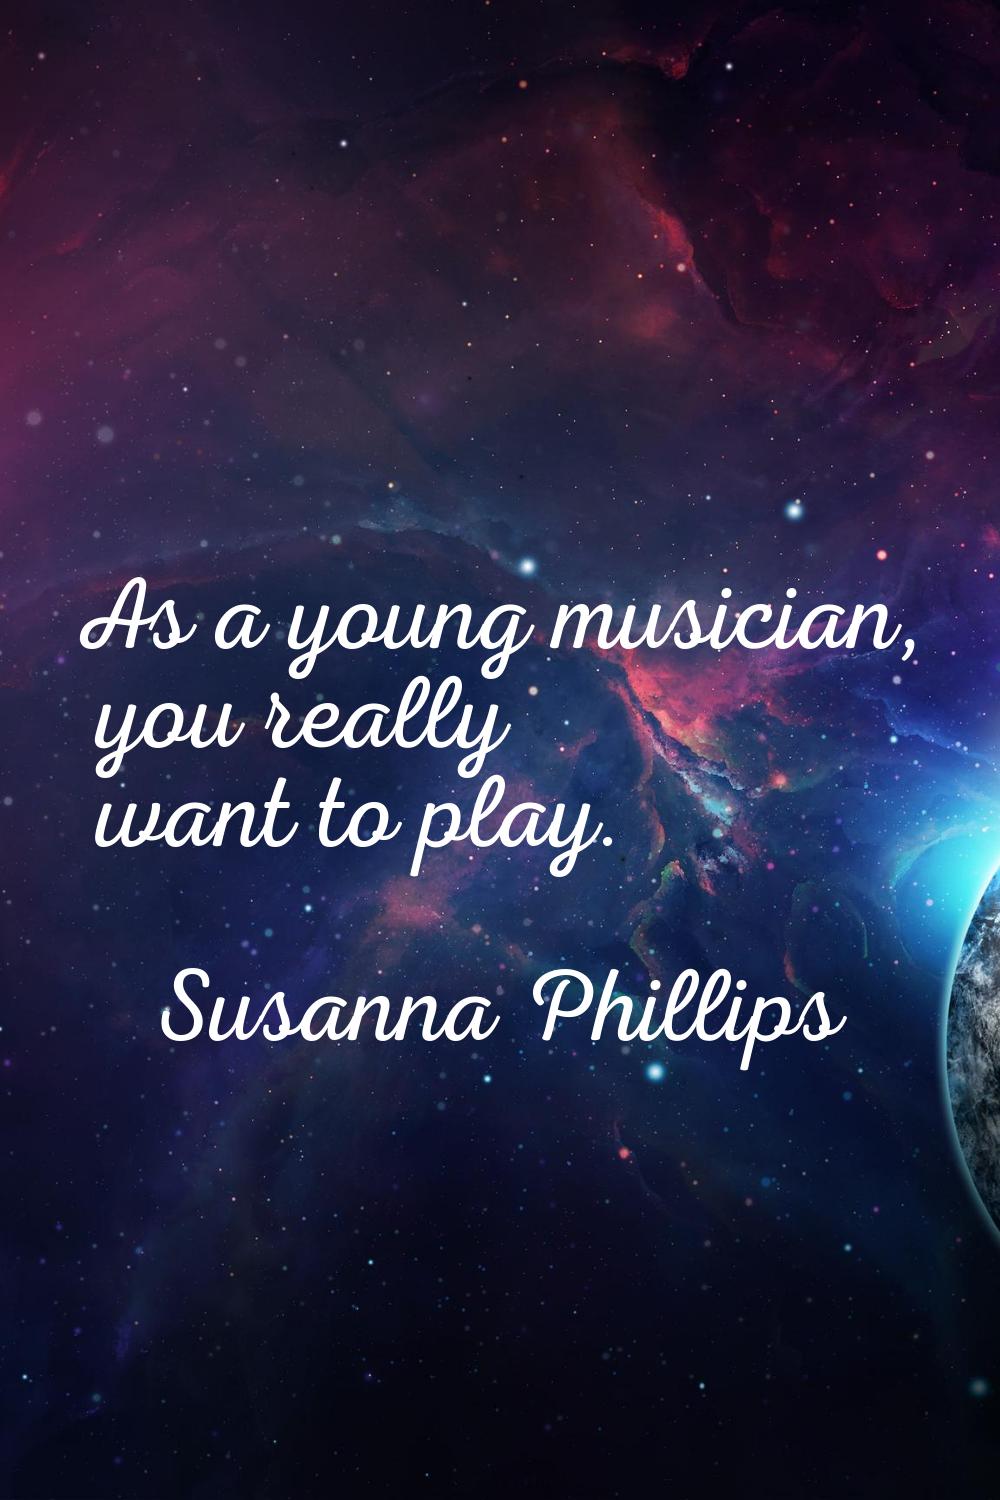 As a young musician, you really want to play.